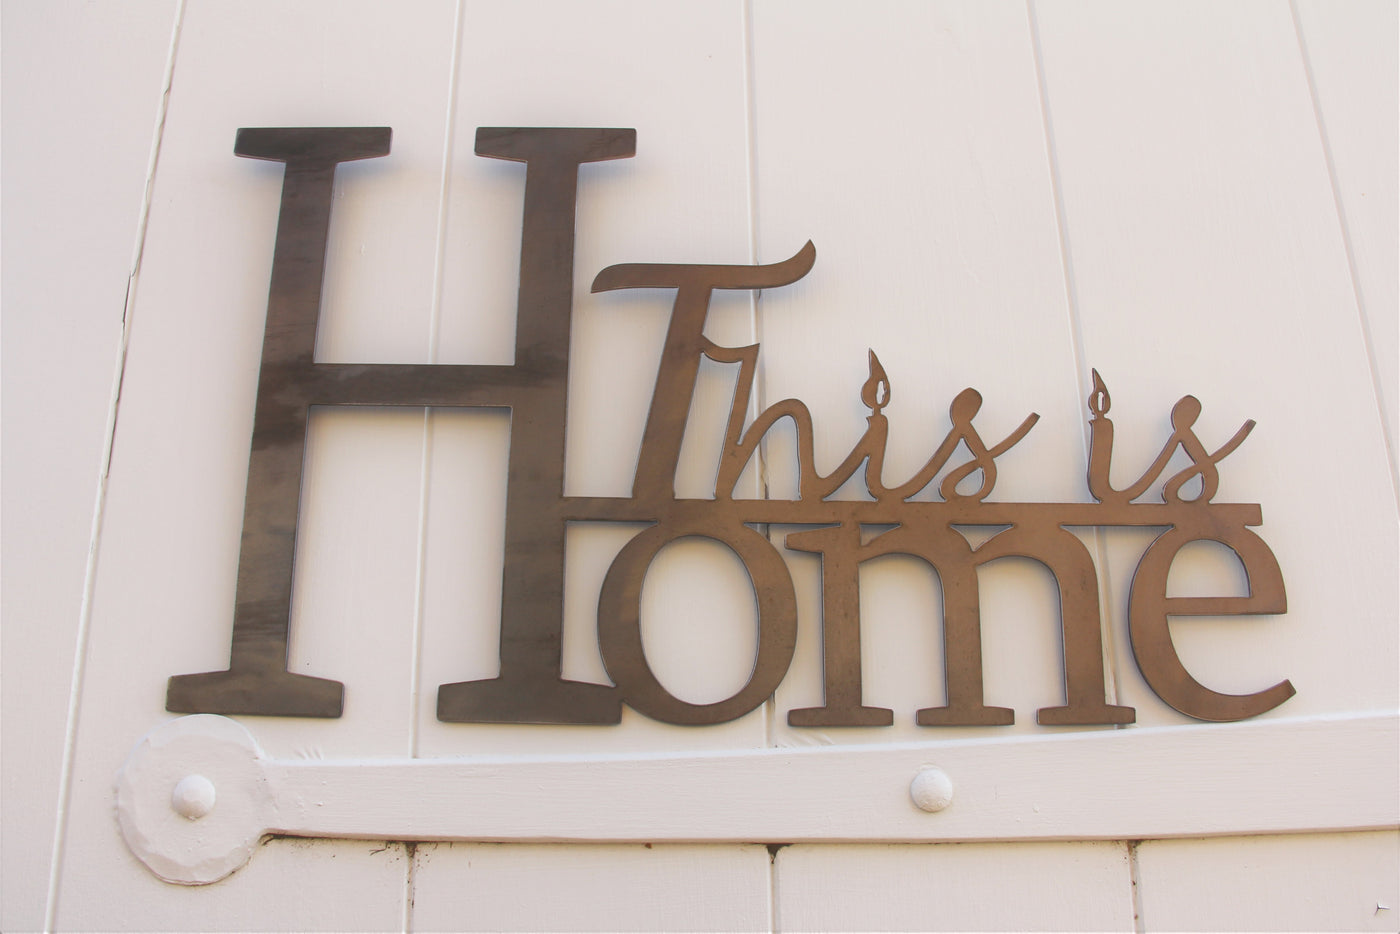 This is Home Metal Word Sign - Madison Iron and Wood - Metal Art - metal outdoor decor - Steel deocrations - american made products - veteran owned business products - fencing decorations - fencing supplies - custom wall decorations - personalized wall signs - steel - decorative post caps - steel post caps - metal post caps - brackets - structural brackets - home improvement - easter - easter decorations - easter gift - easter yard decor